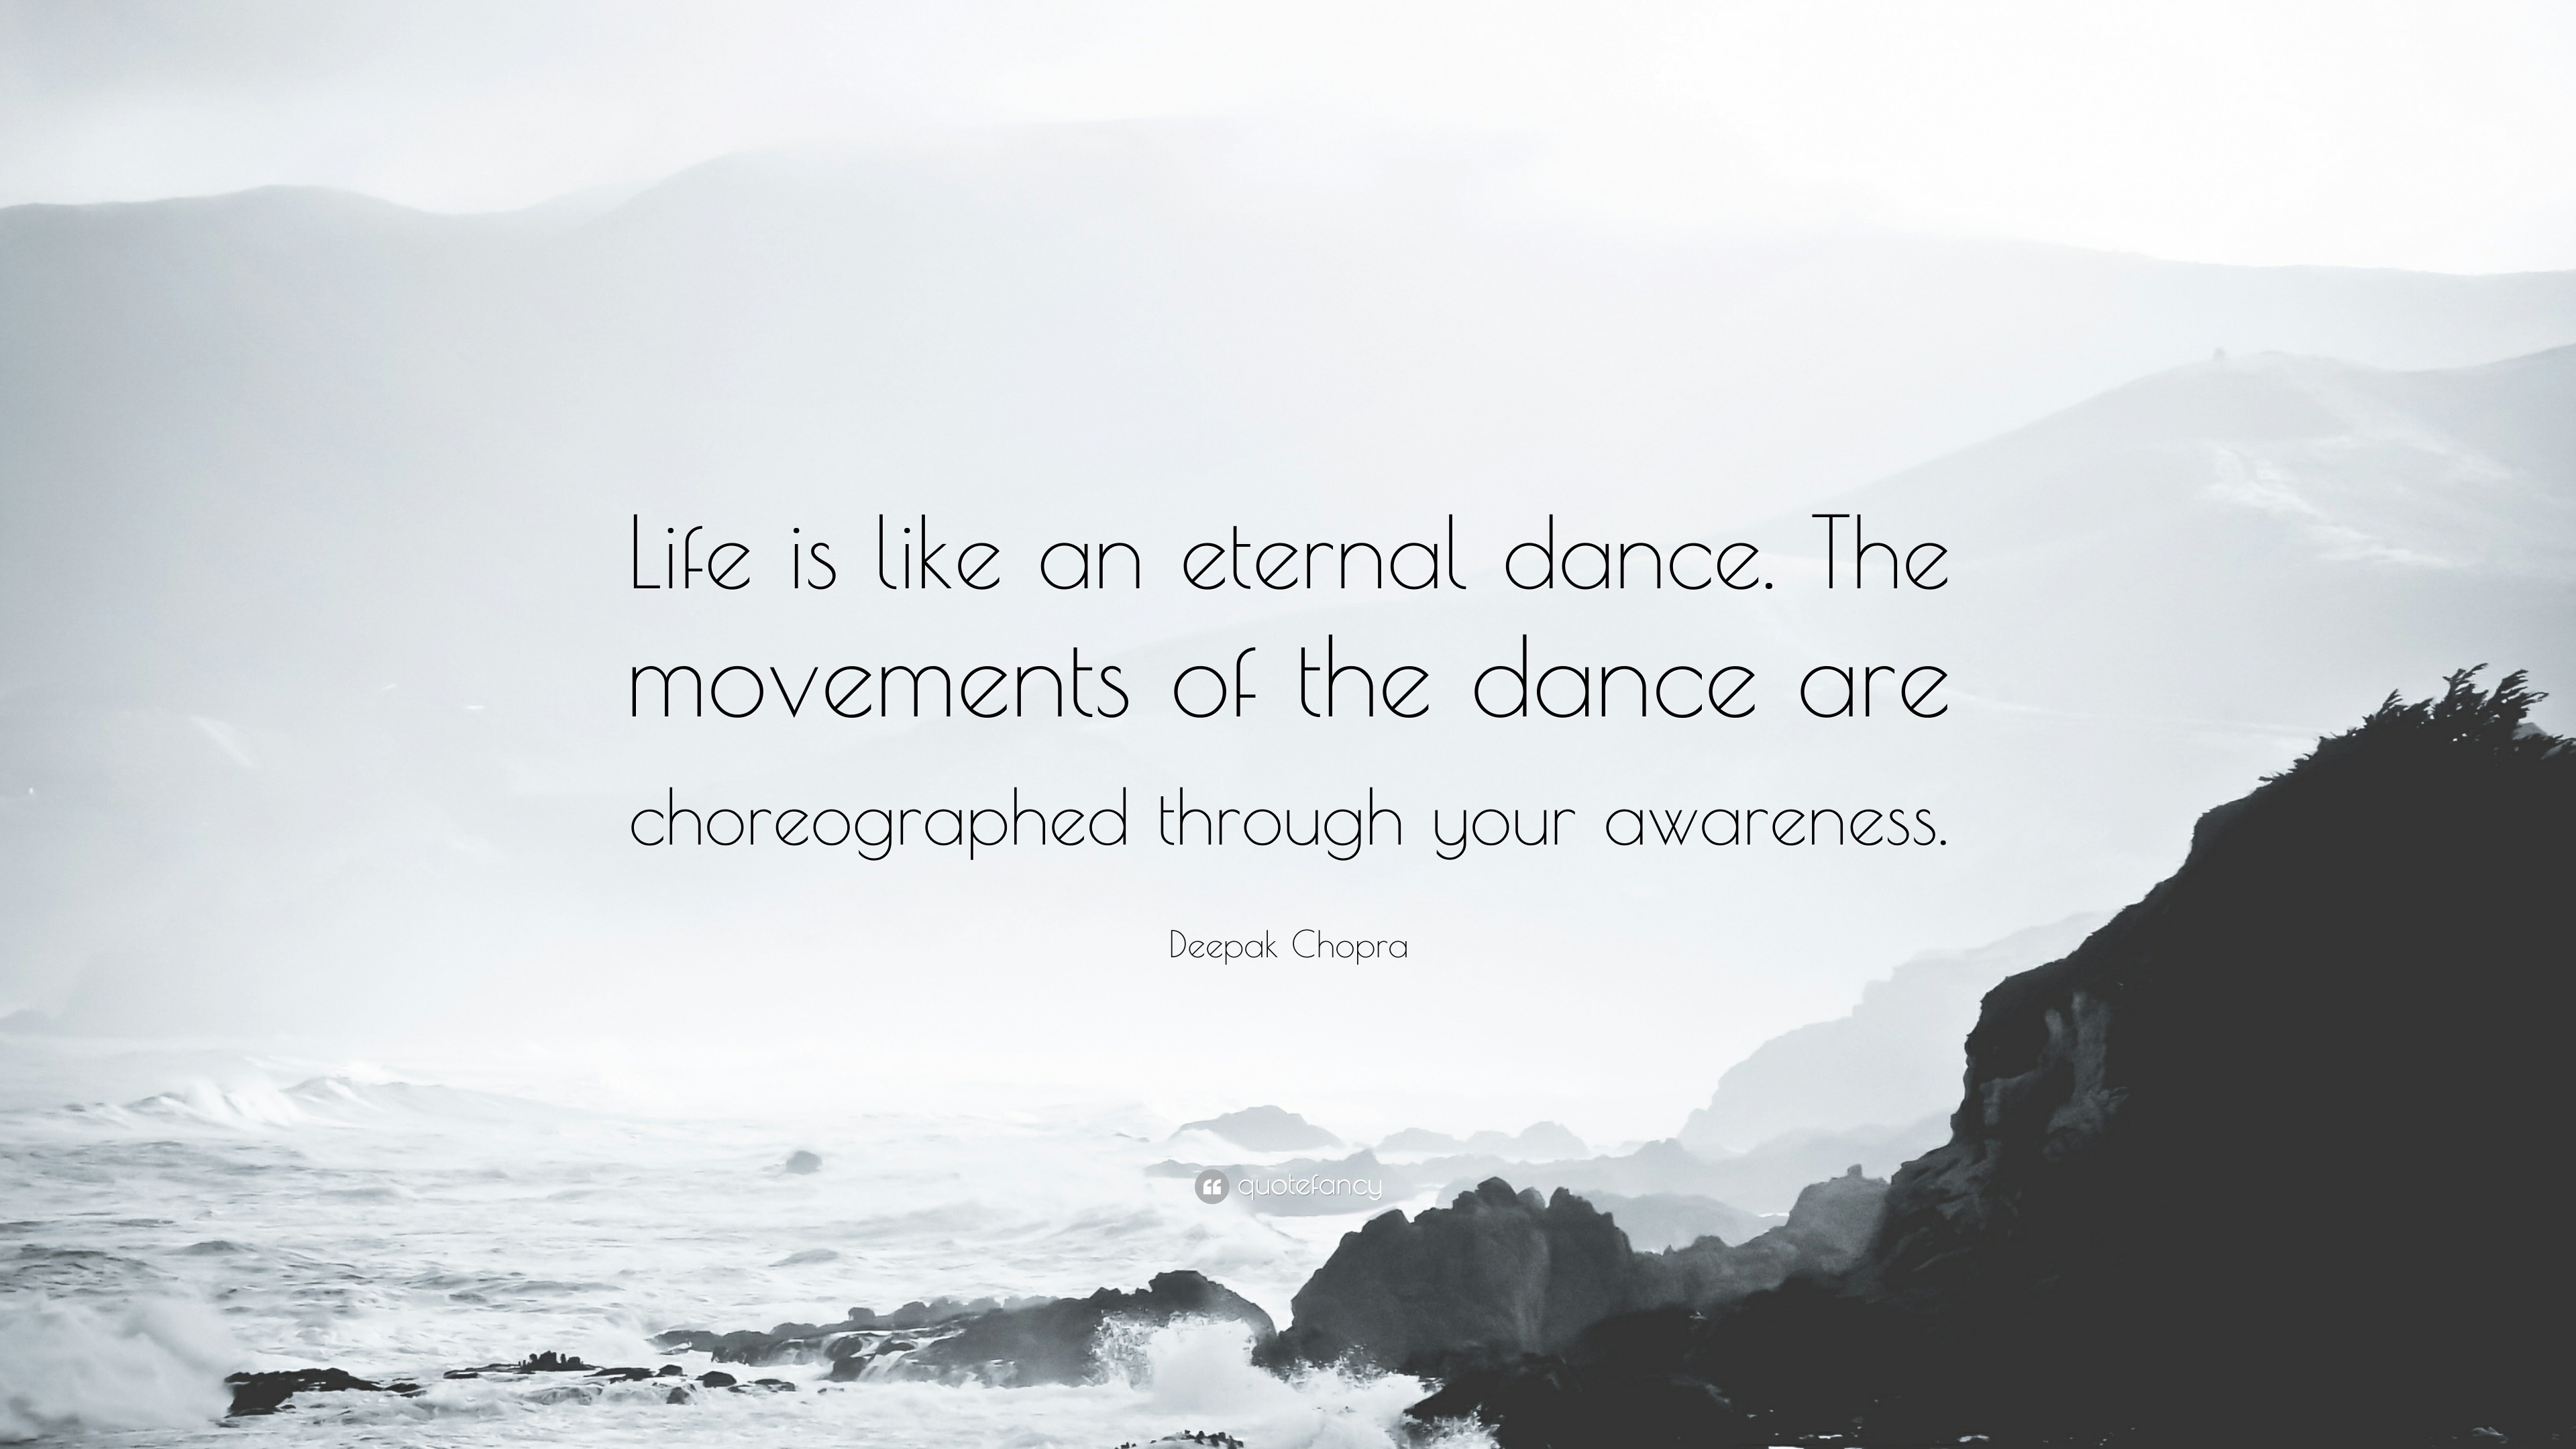 Deepak Chopra Quote “Life is like an eternal dance The movements of the